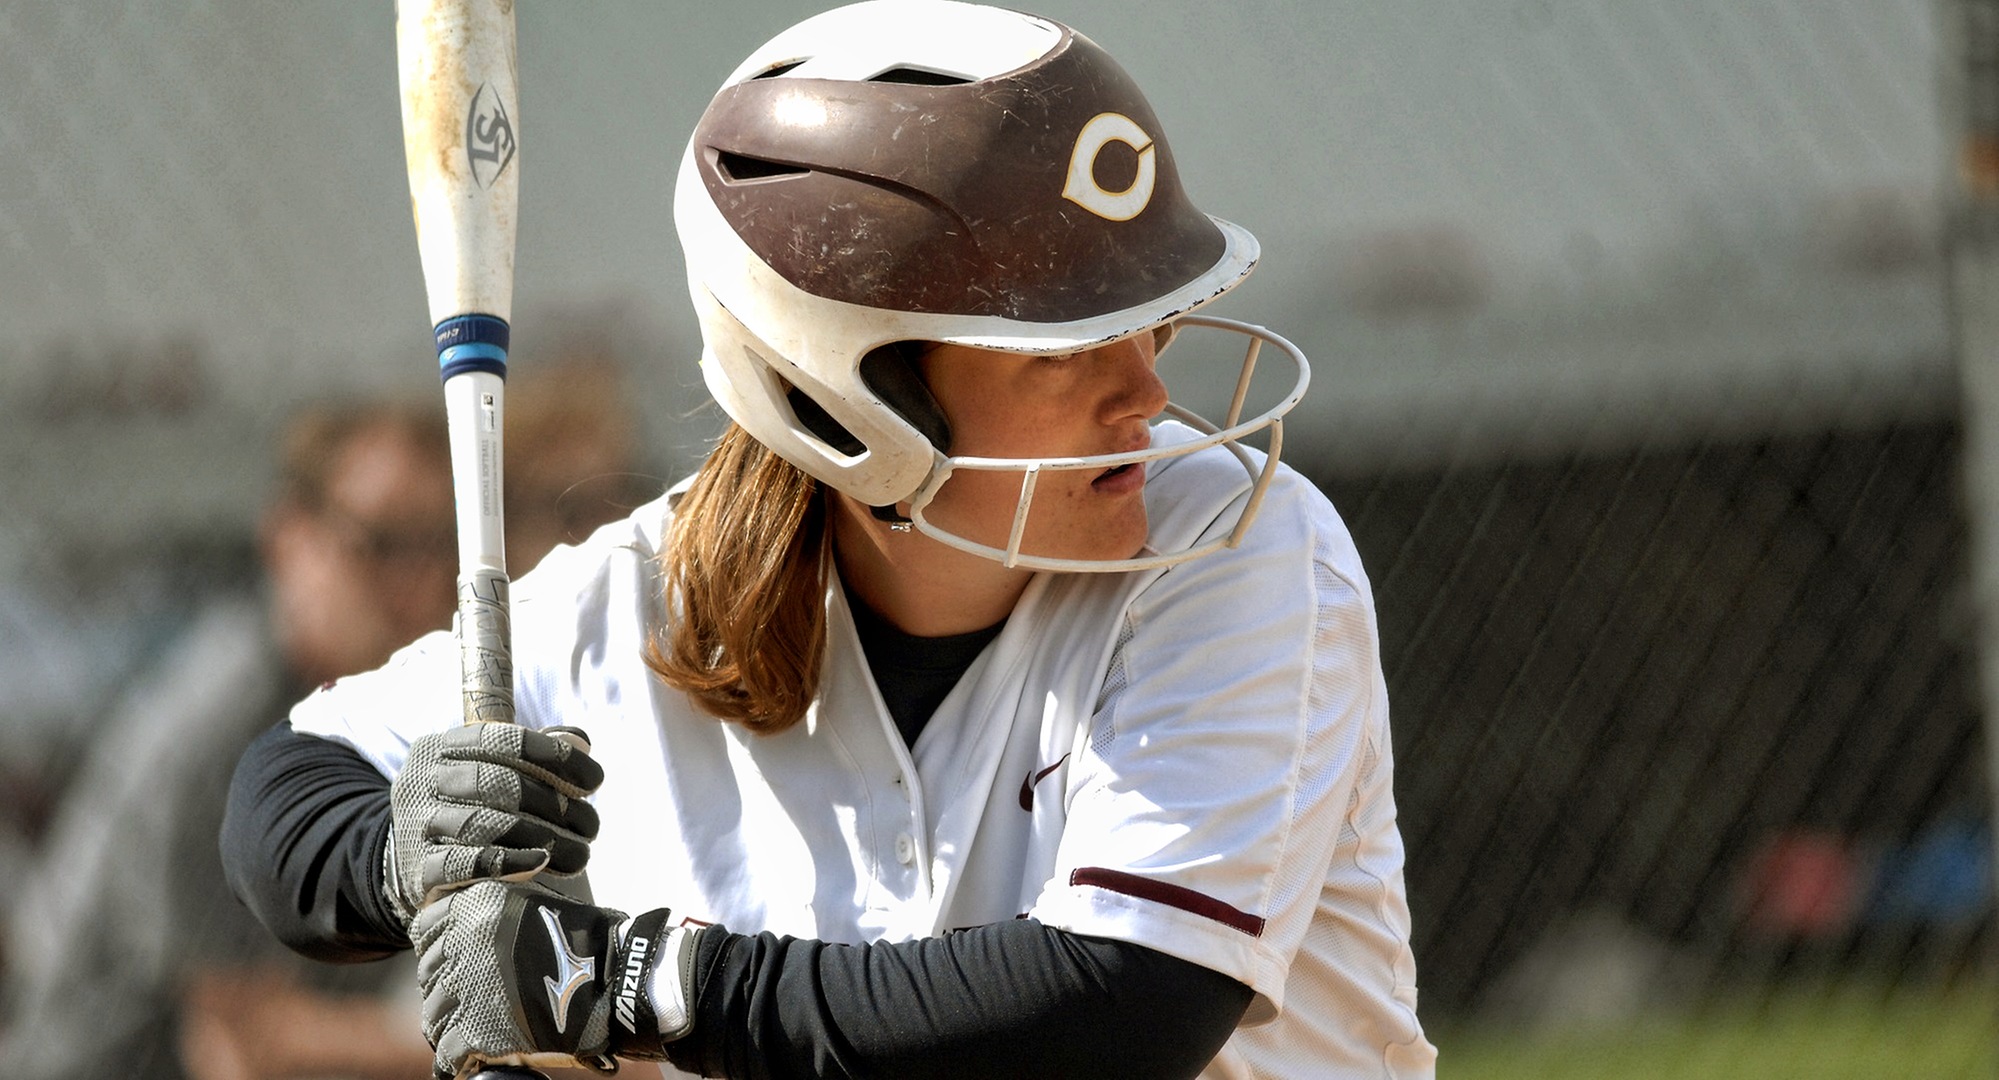 Junior Taylor Erholtz hit her second career home run in the Cobbers' game with Eastern Nazarene.